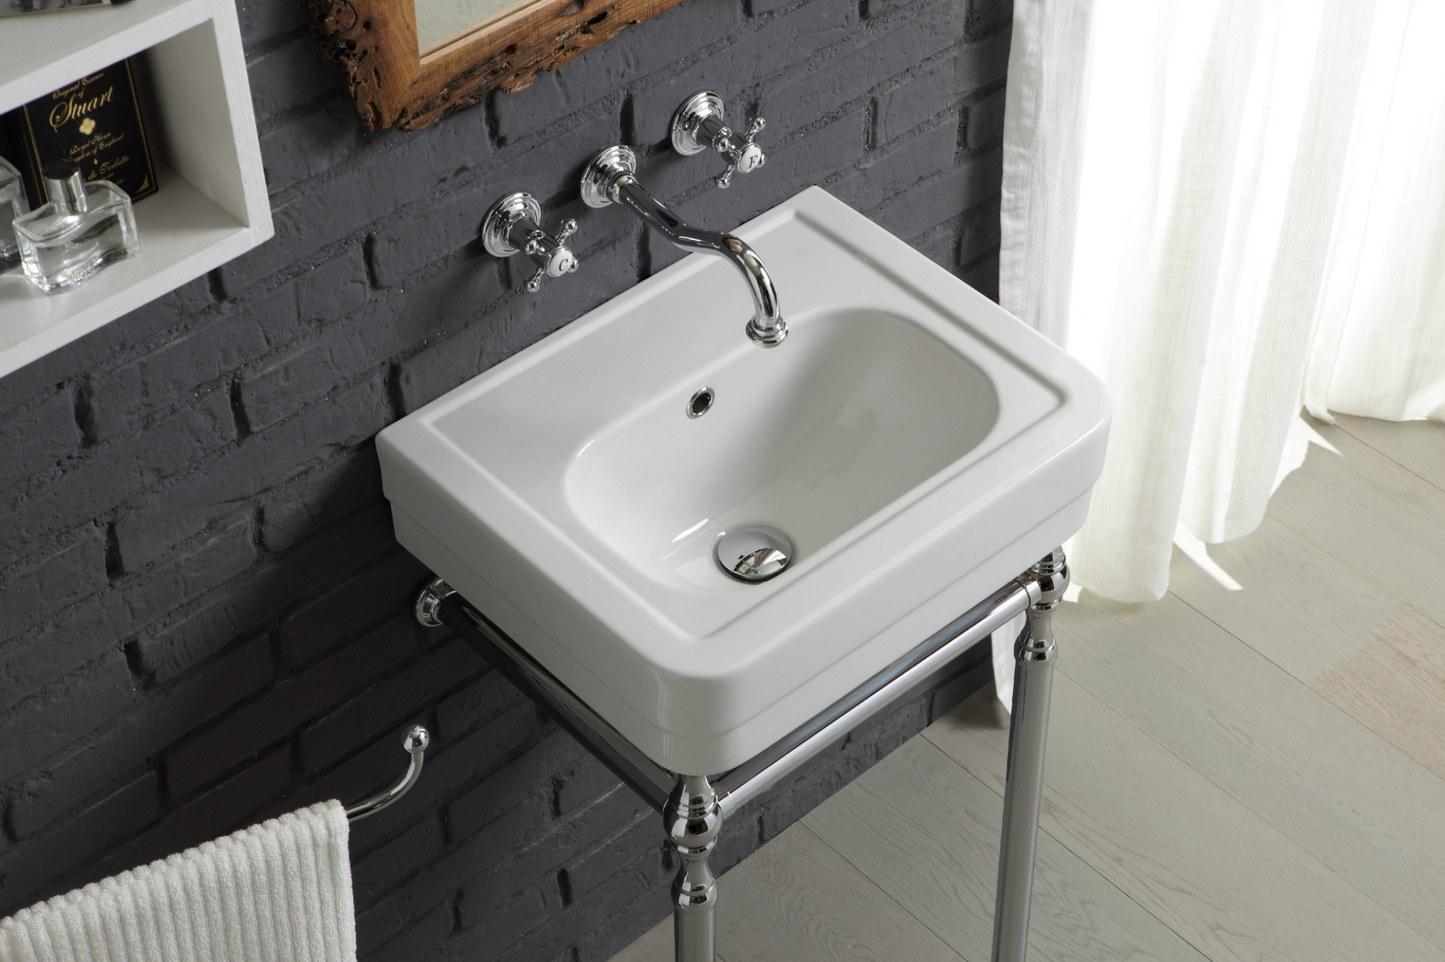 Classic style ceramic sink with classic ground metal base